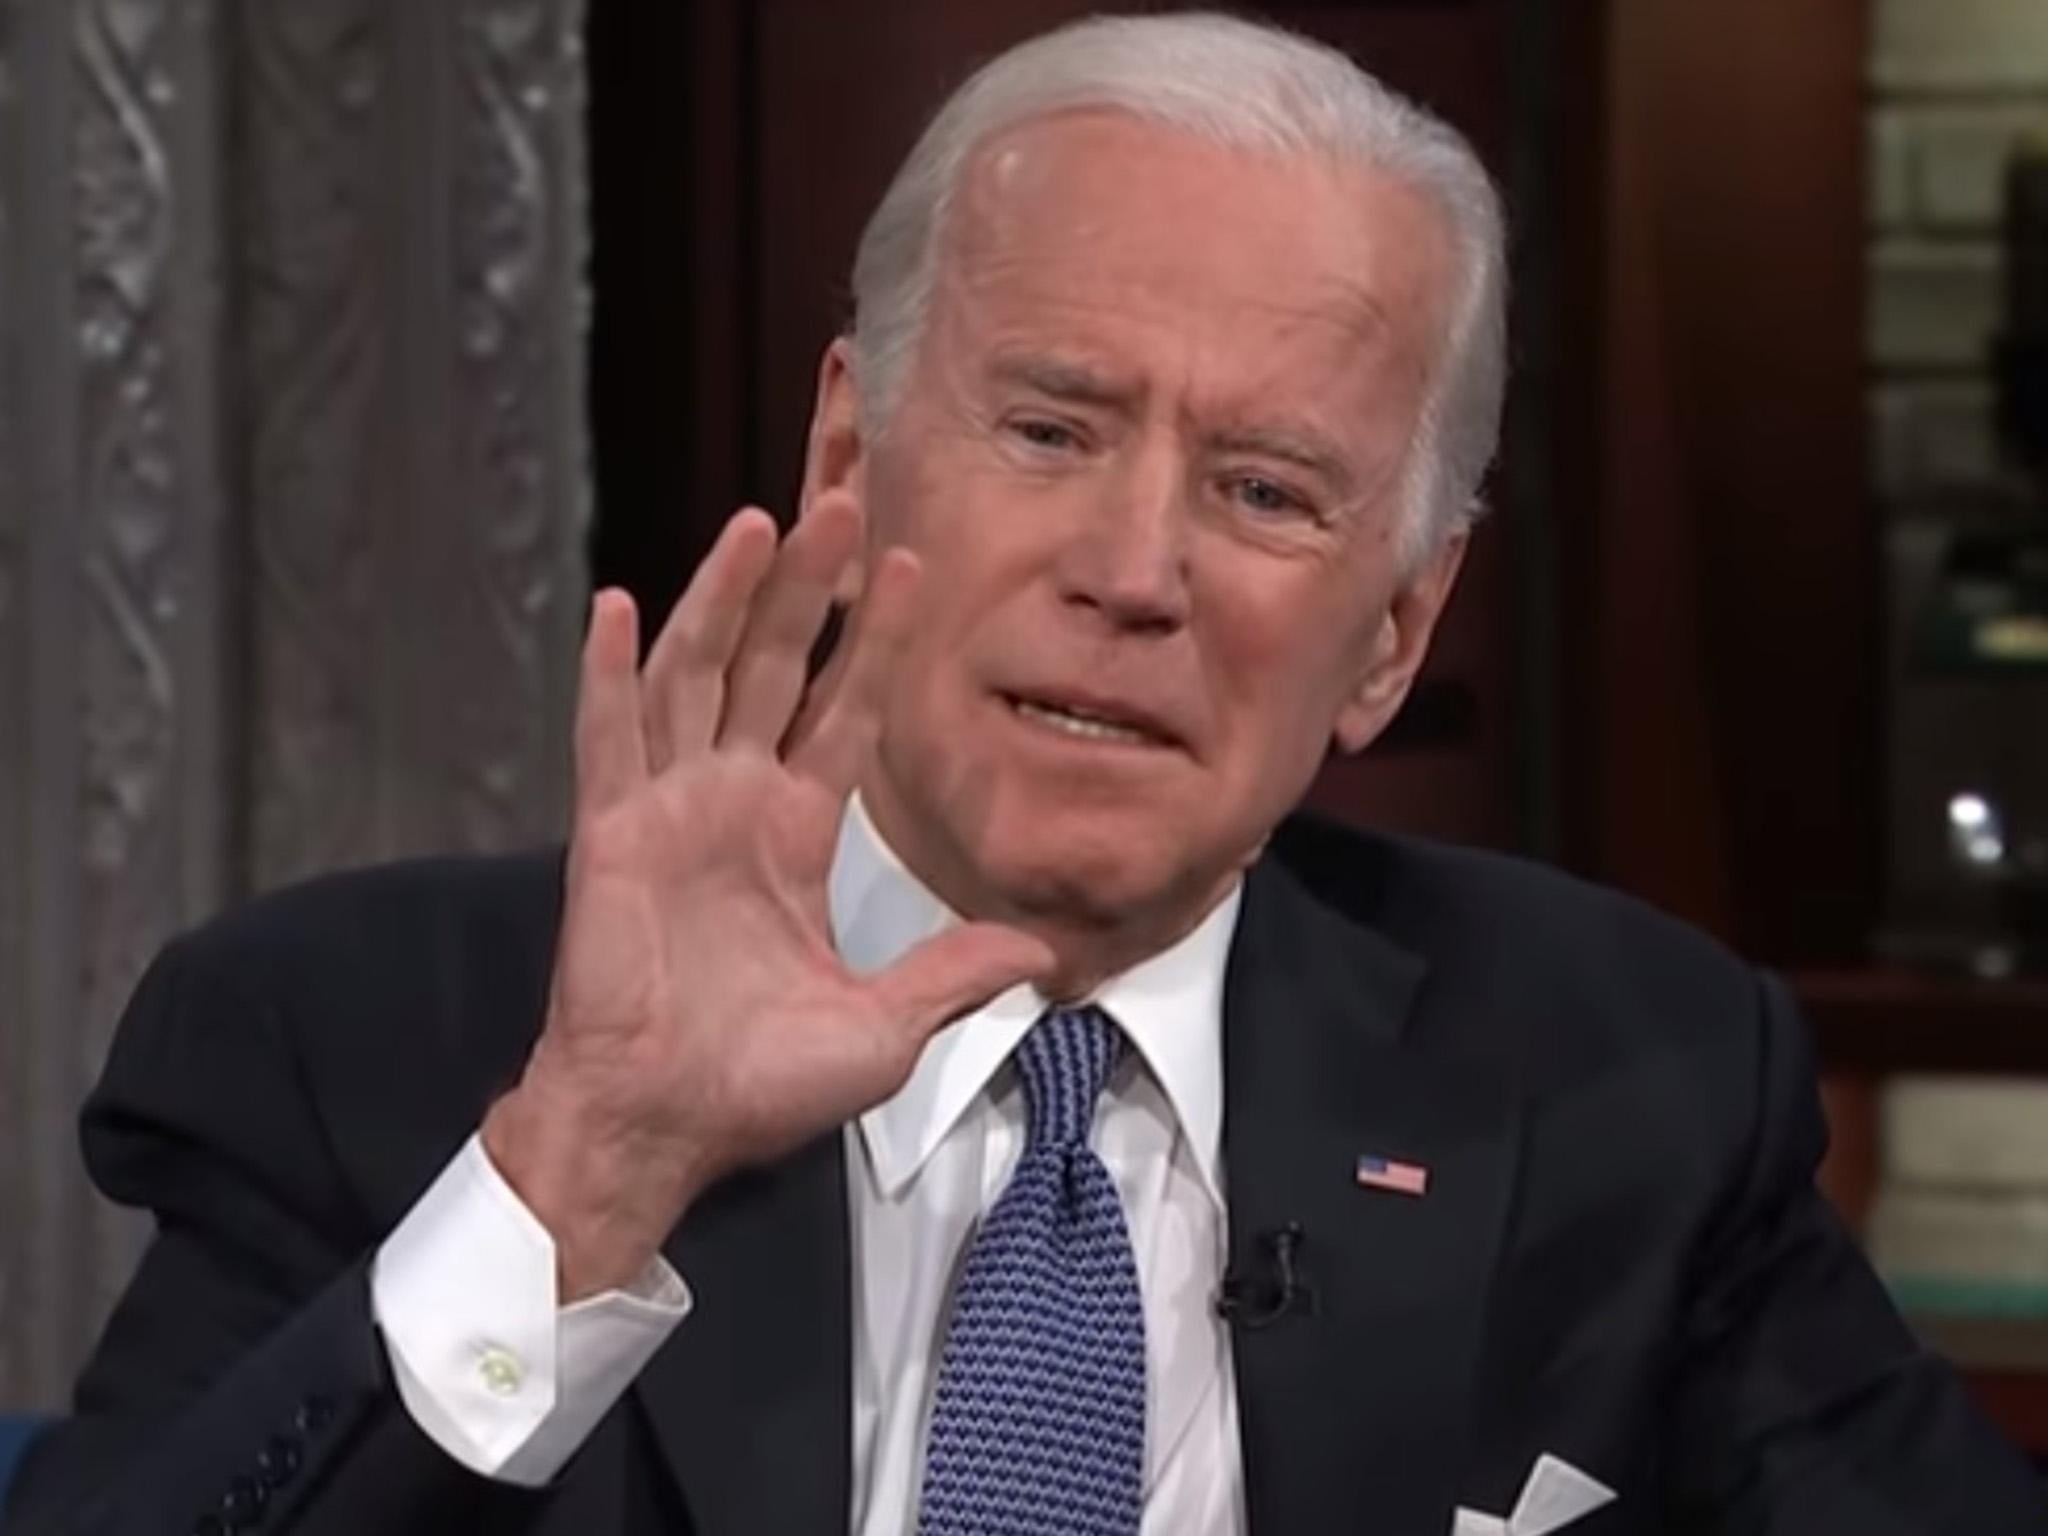 Joe Biden said he hoped the Trump administration would not go on to influence future presidencies.